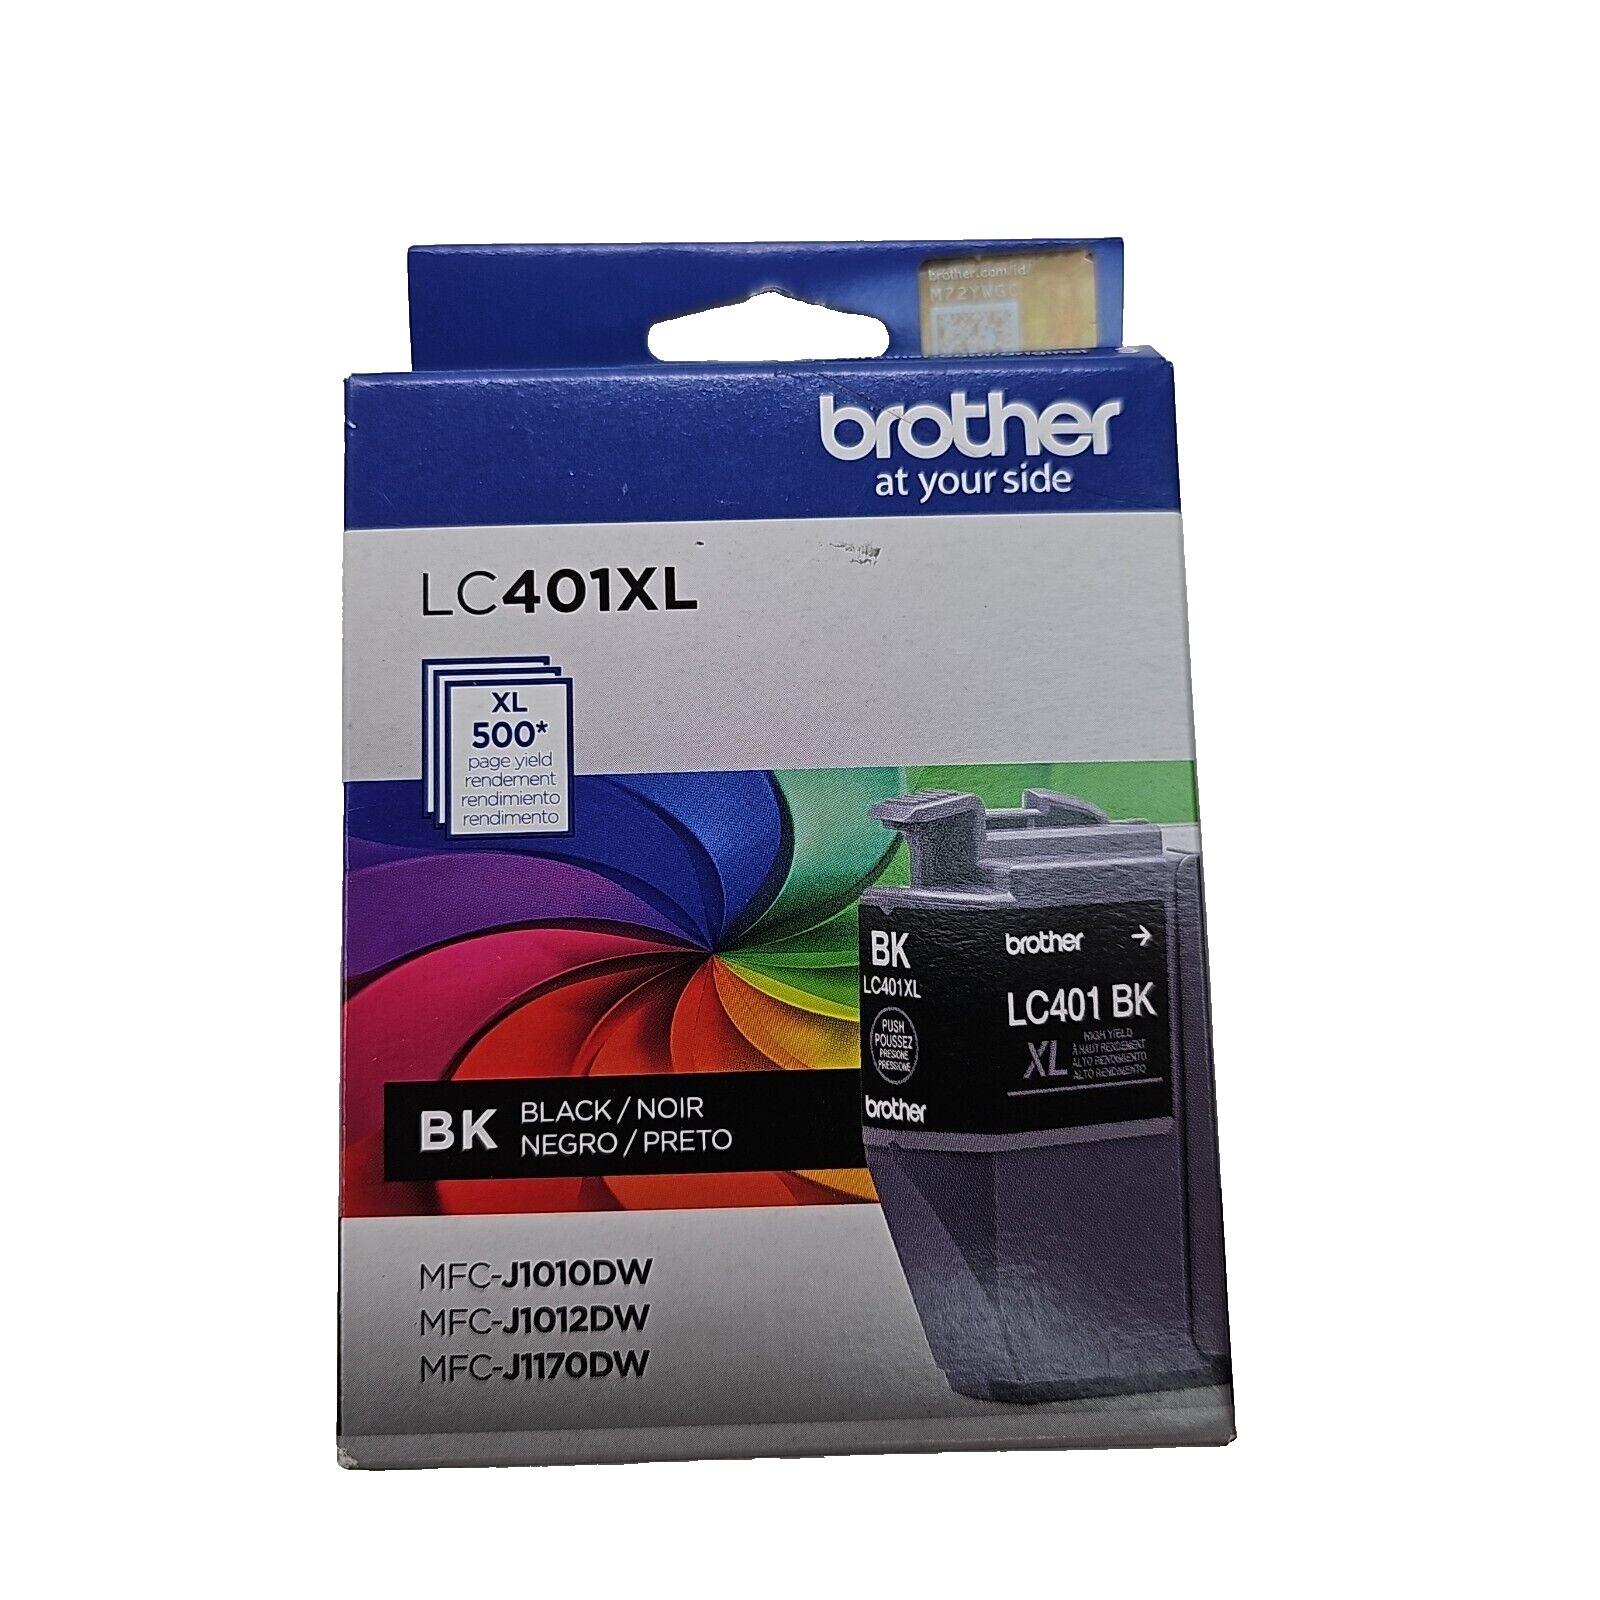 Brother LC401XL High-Yield Genuine Black Cartridge New Sealed Exp 2/2026